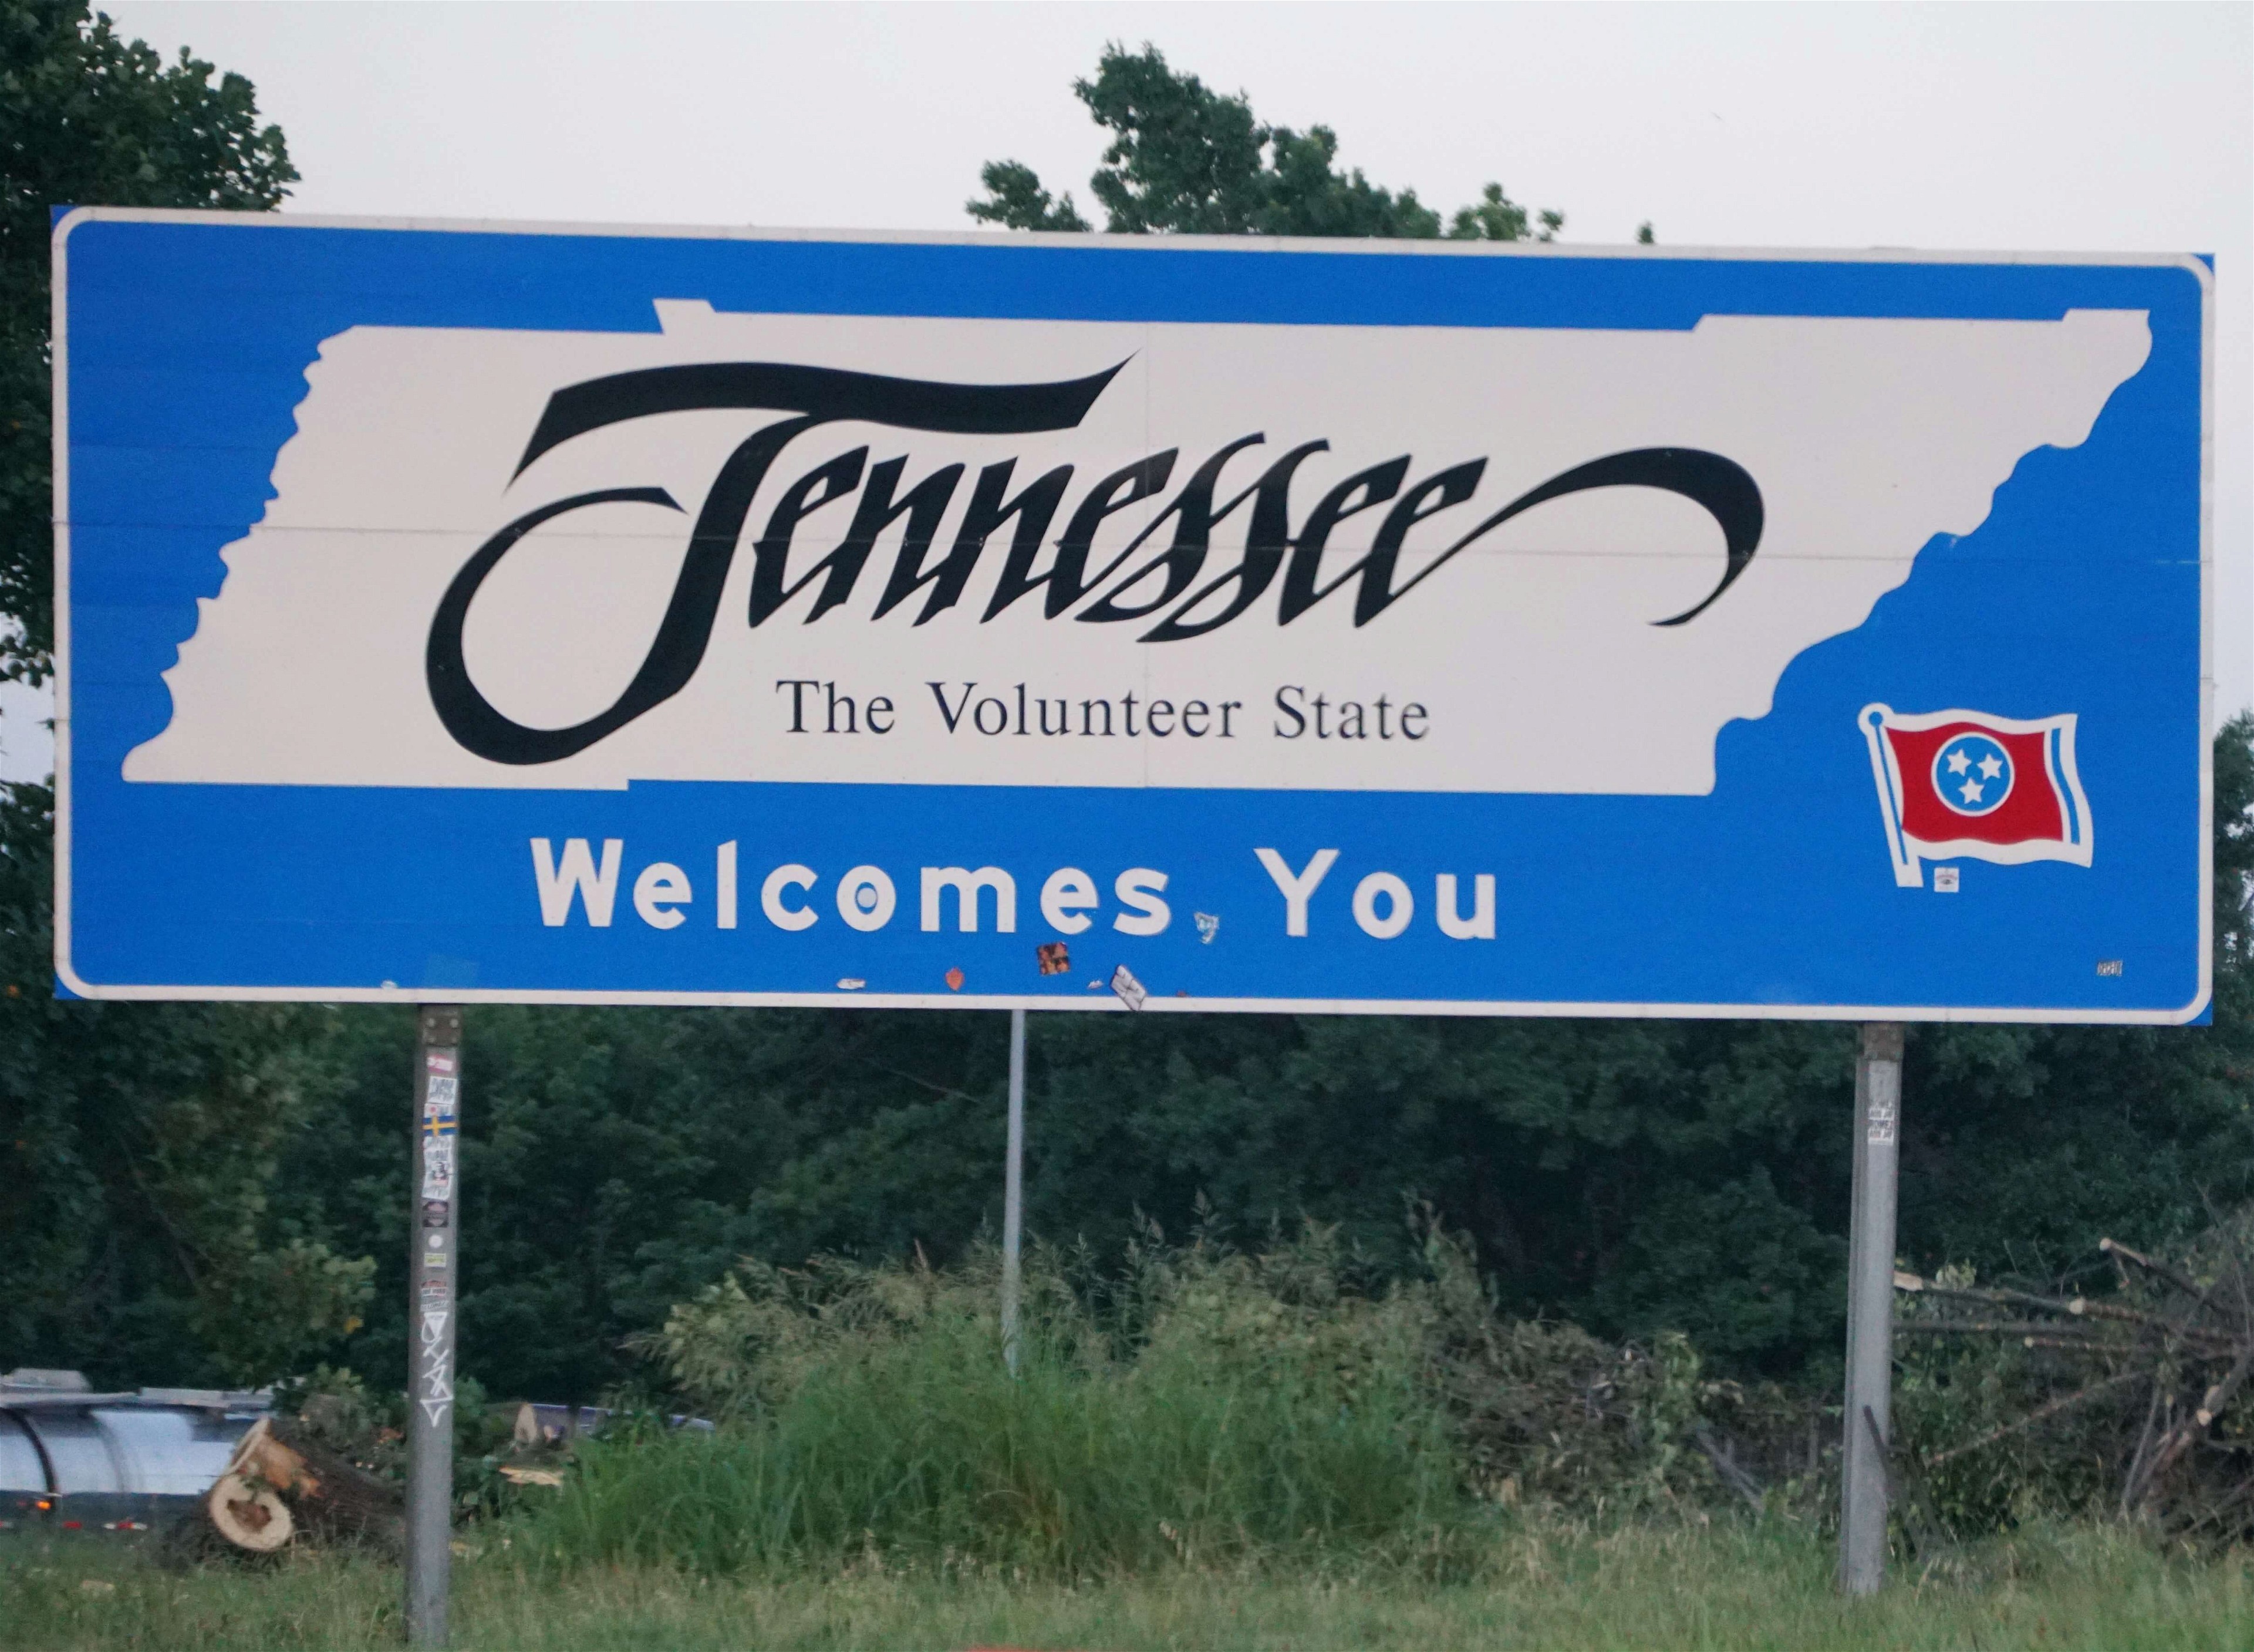 State of Tennessee welcome sign in front of green trees